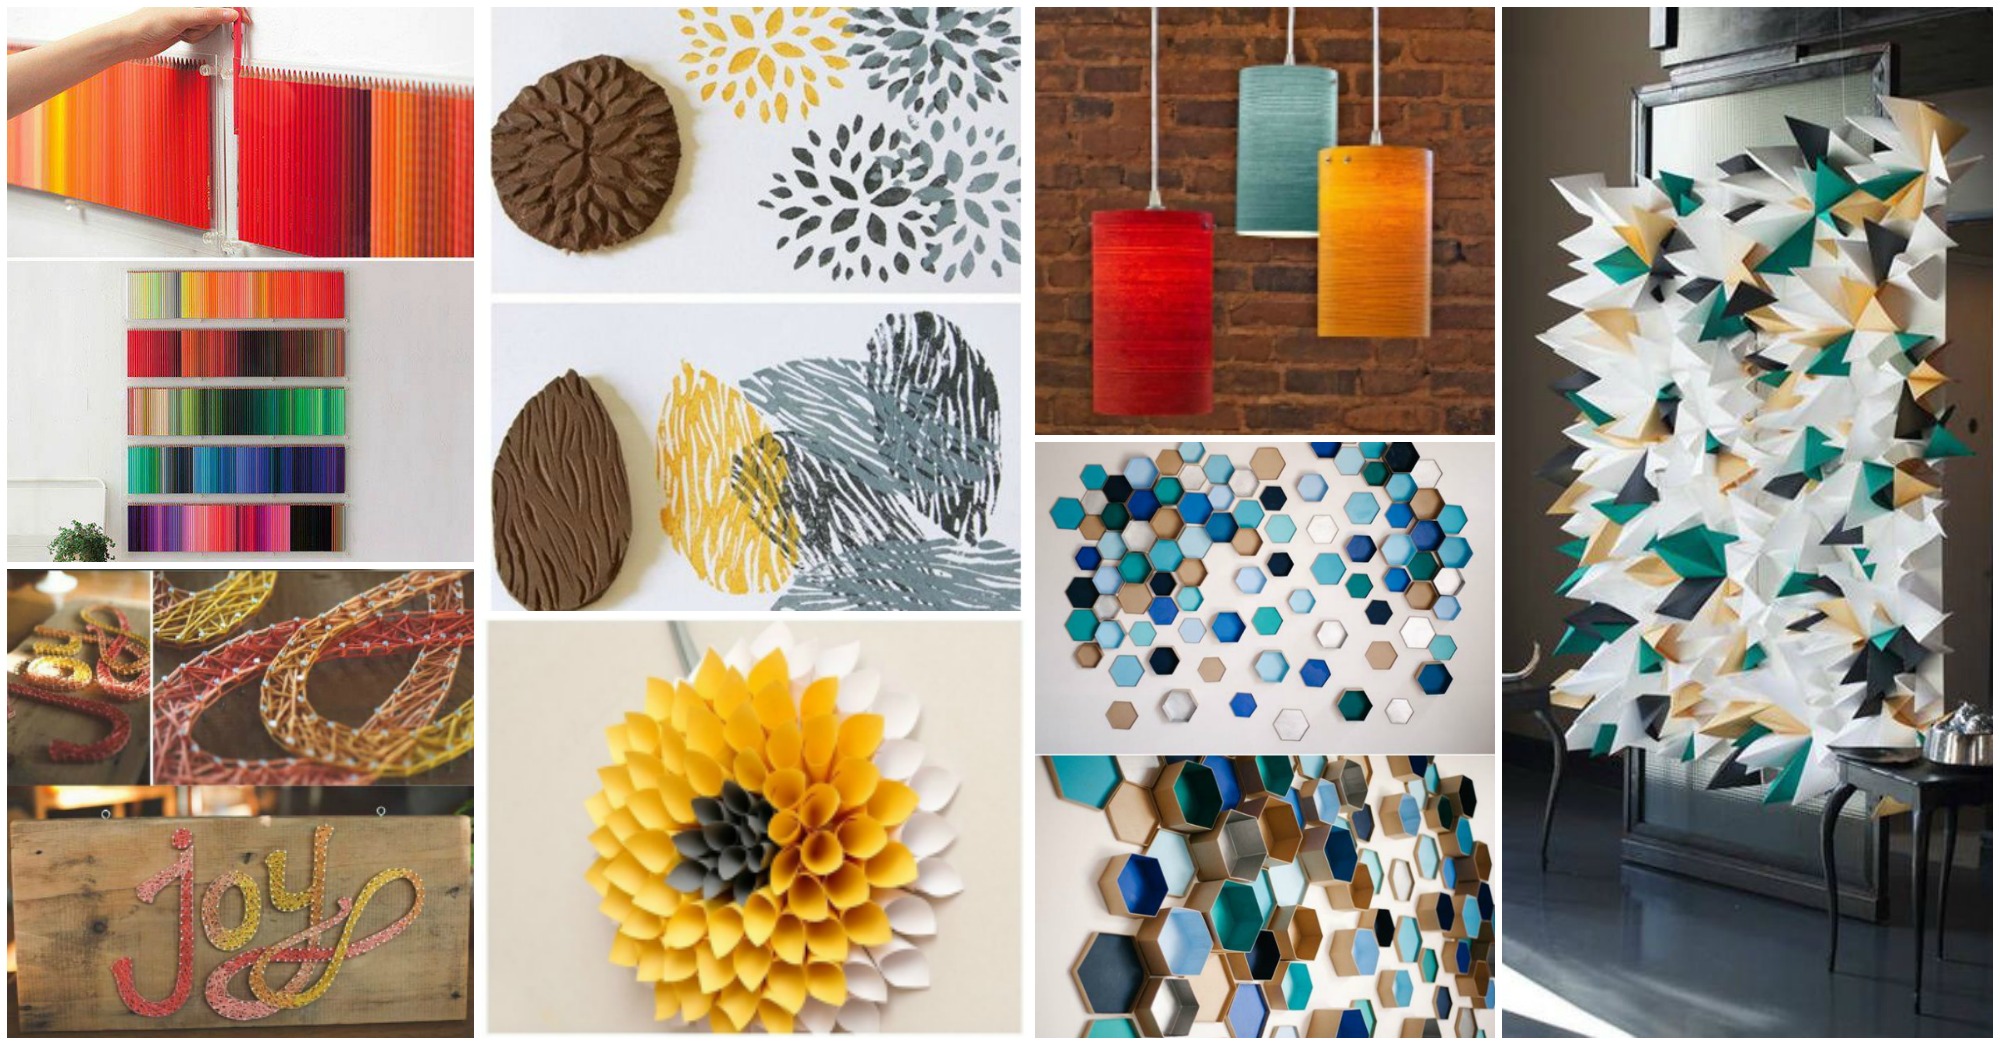 Fantastic DIY Wall Decor Projects That Will Amaze You